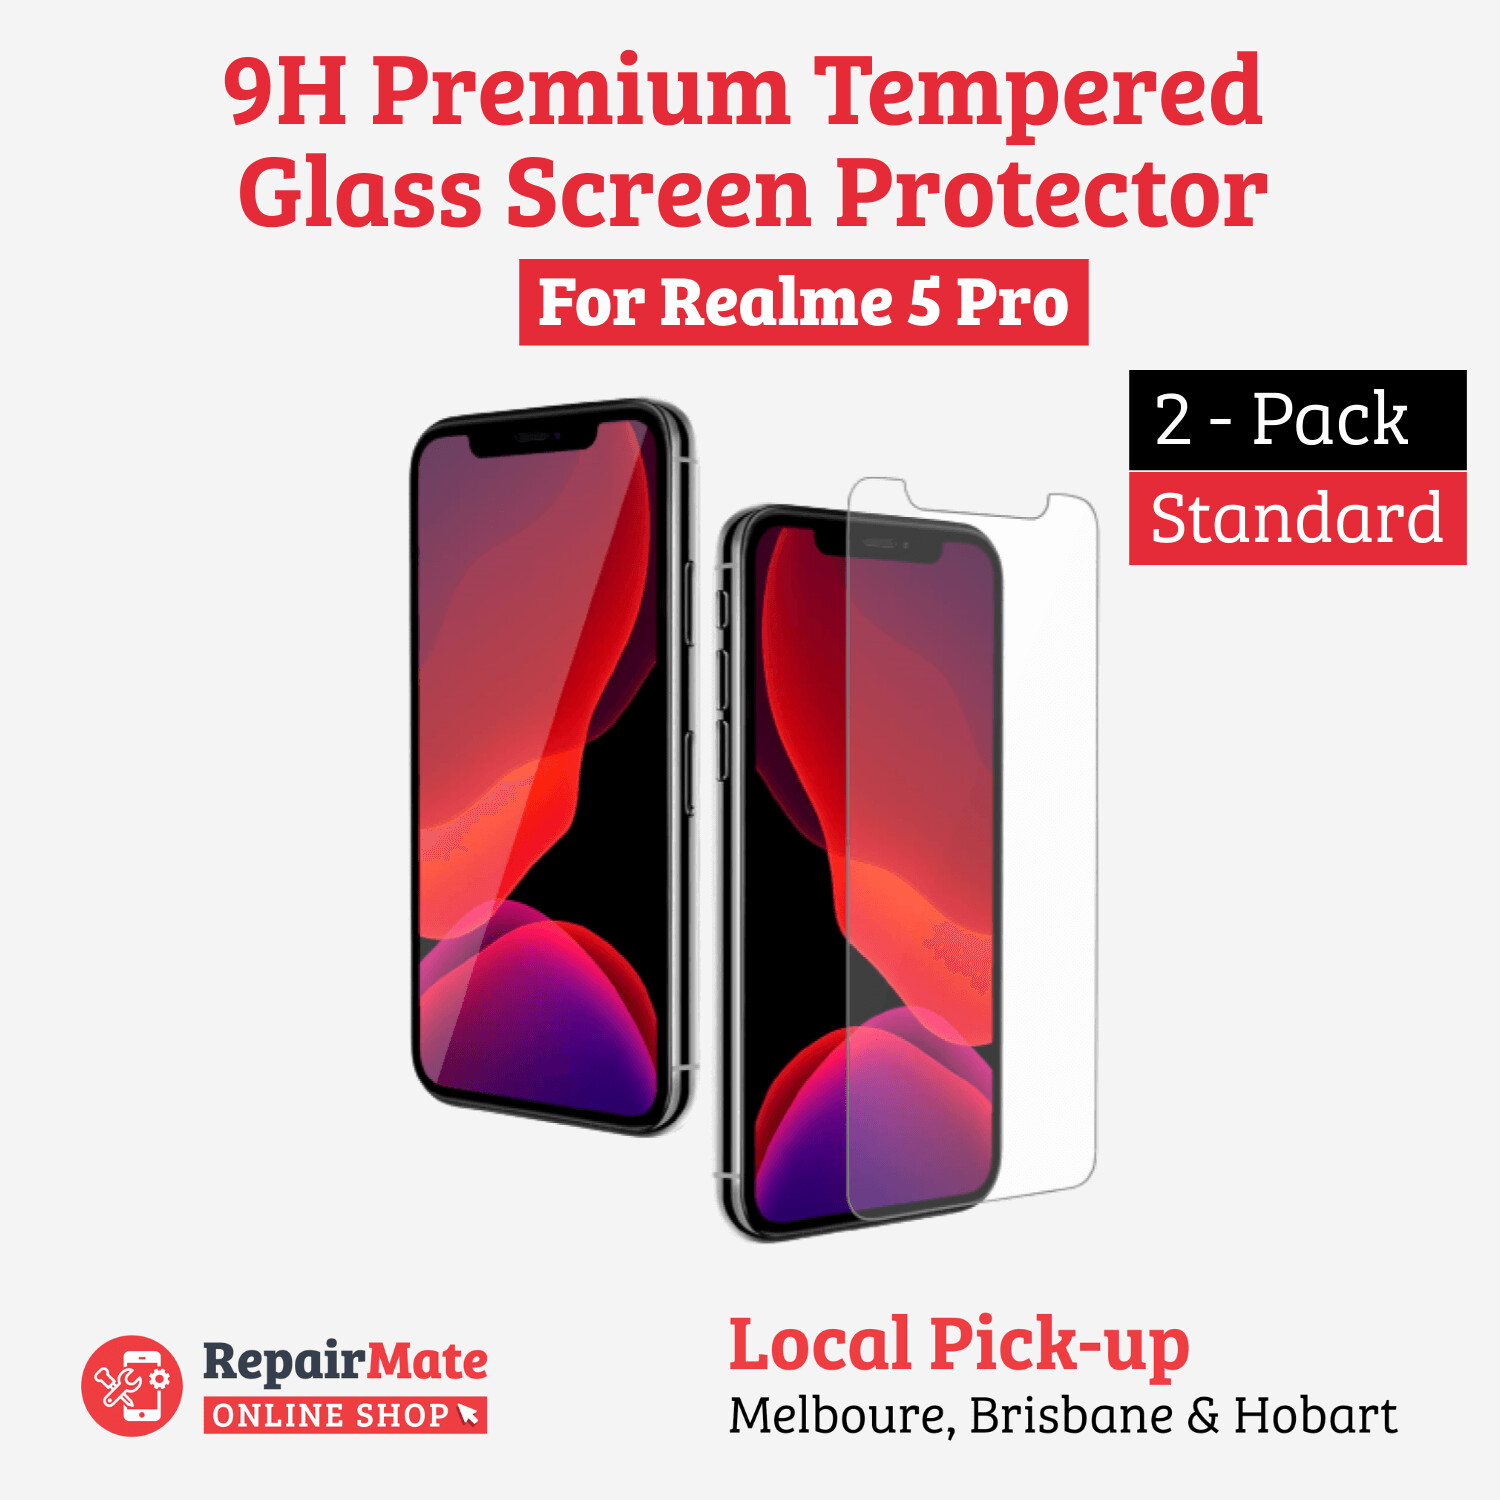 Realme 5 Pro 9H Premium Tempered Glass Screen Protector [2 Pack]